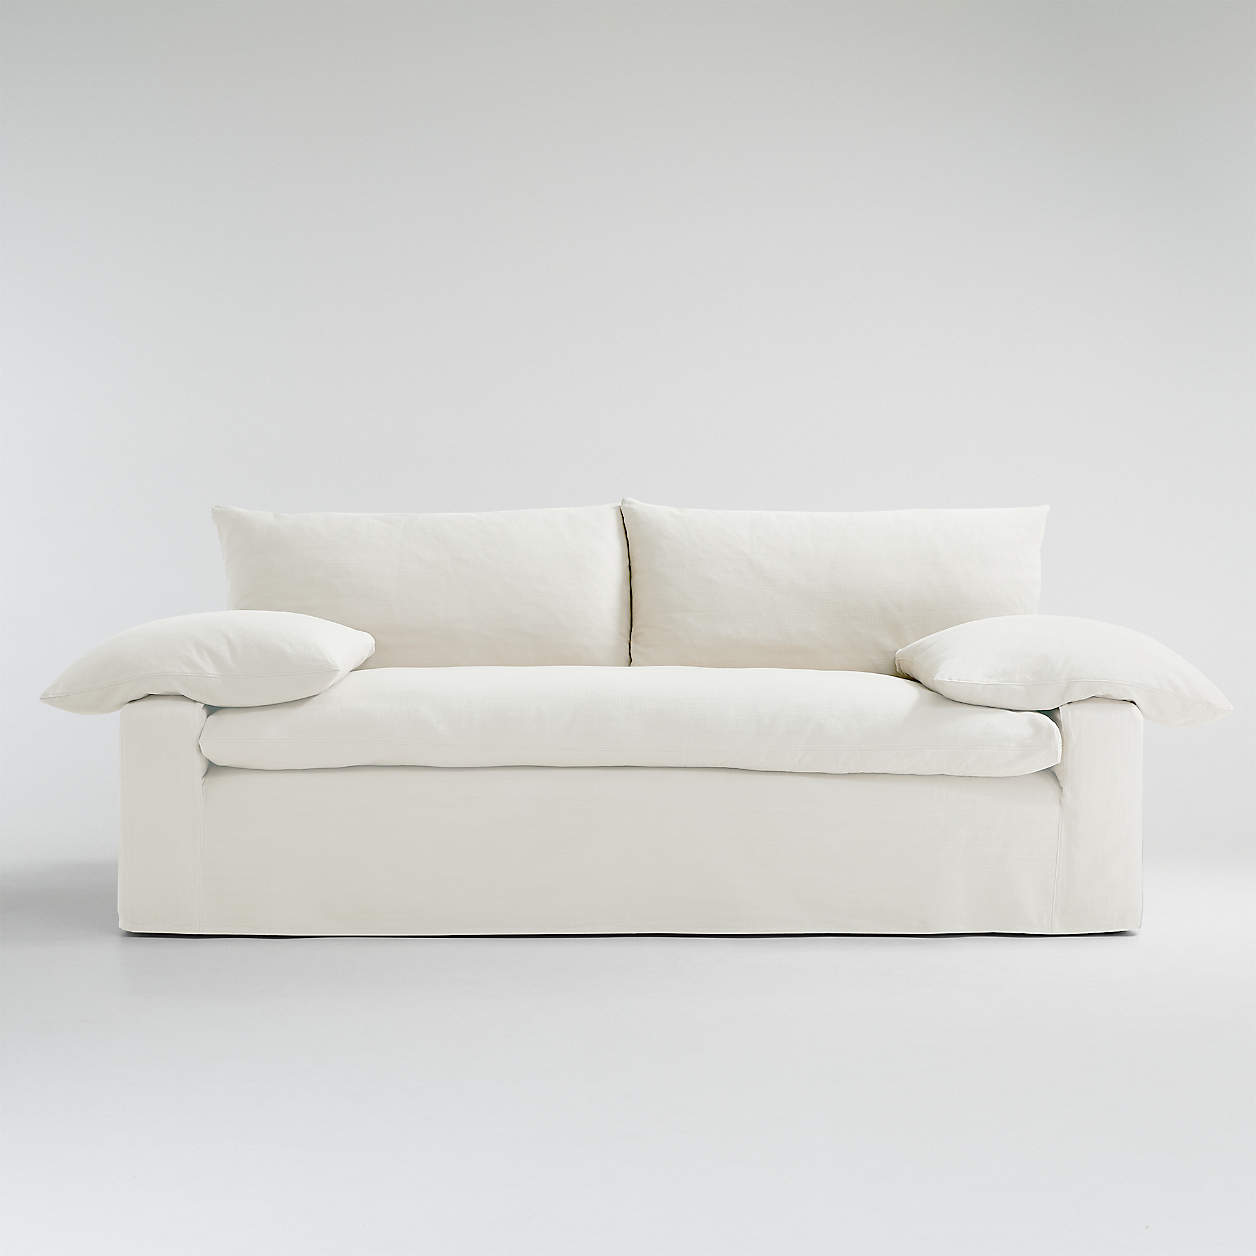 Crate and Barrel Ever Slipcovered Sofa